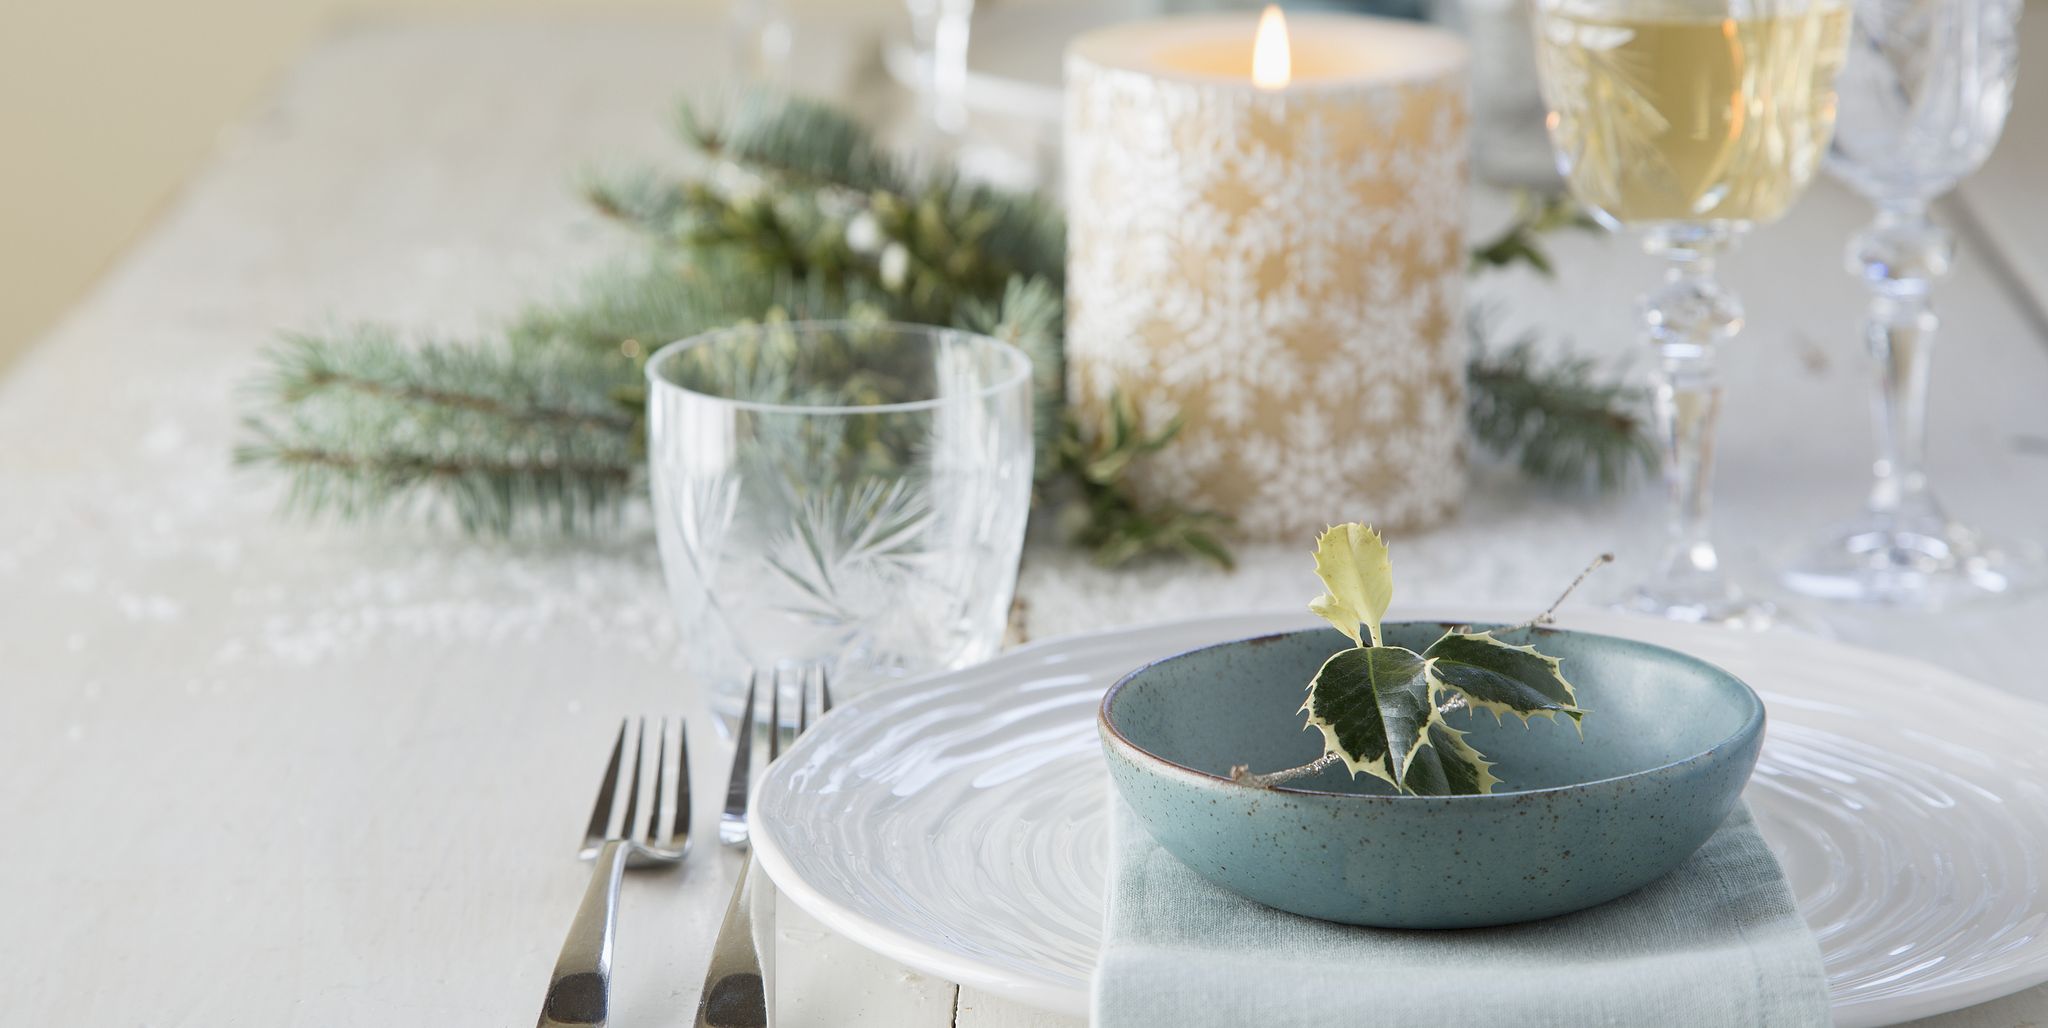 Holly and place setting on Christmas table